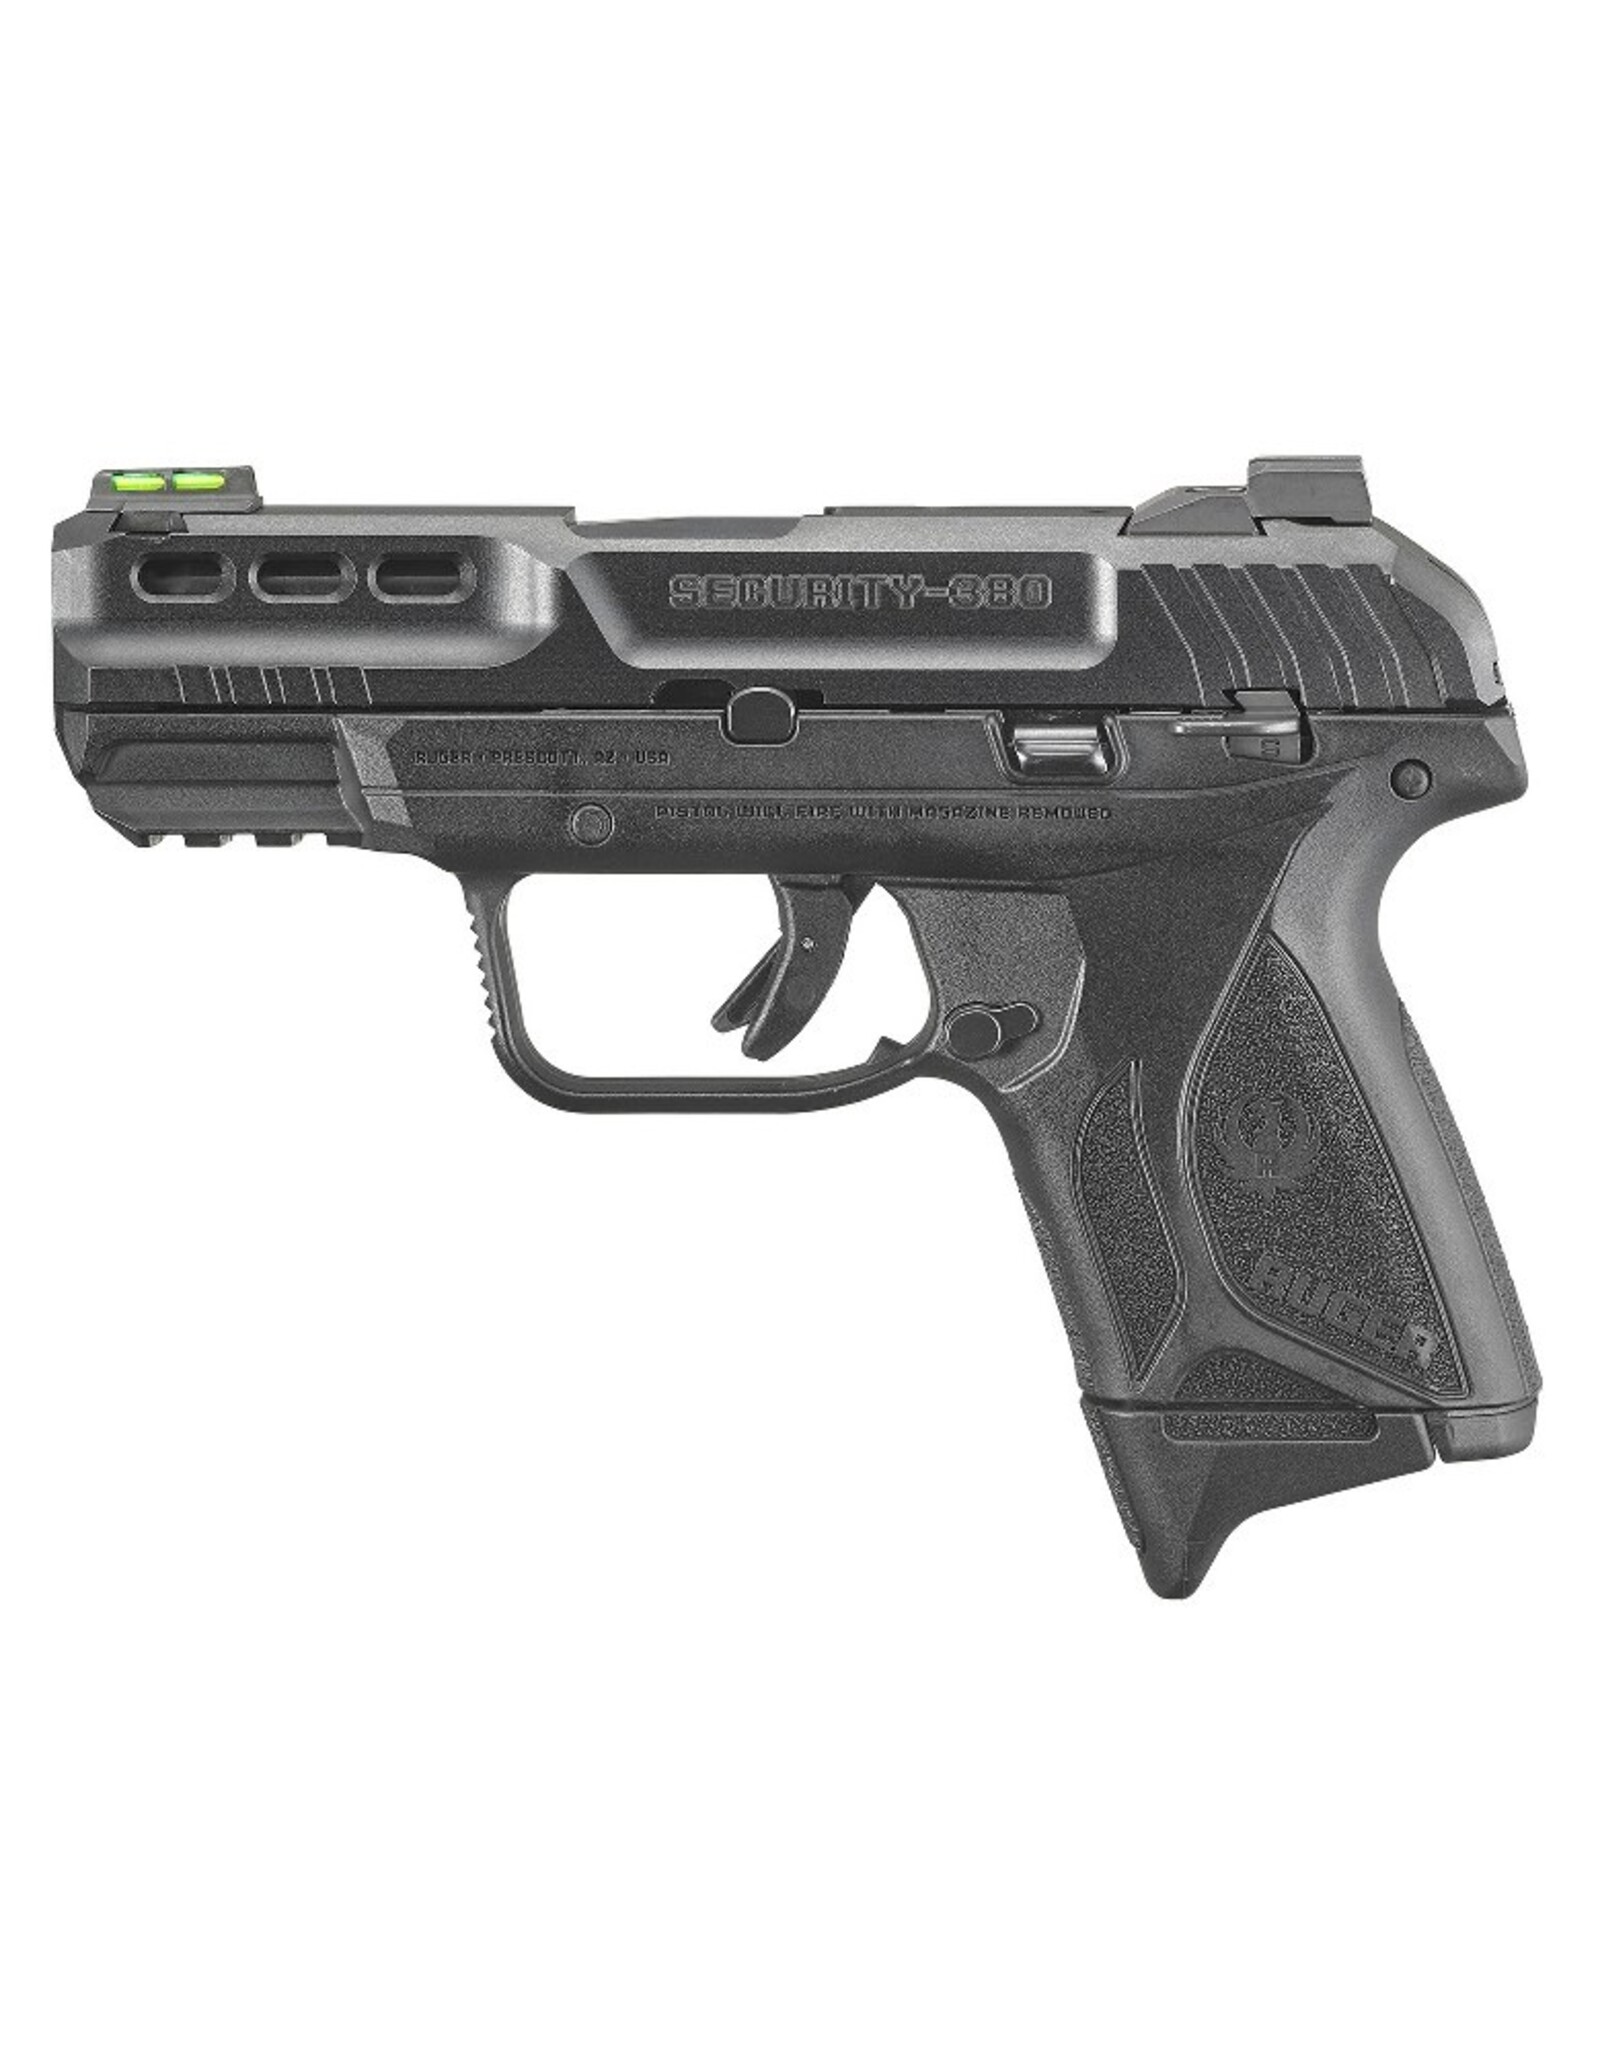 Ruger Security-380 - .380 ACP 3.42" bbl 10+1/15+1 Round